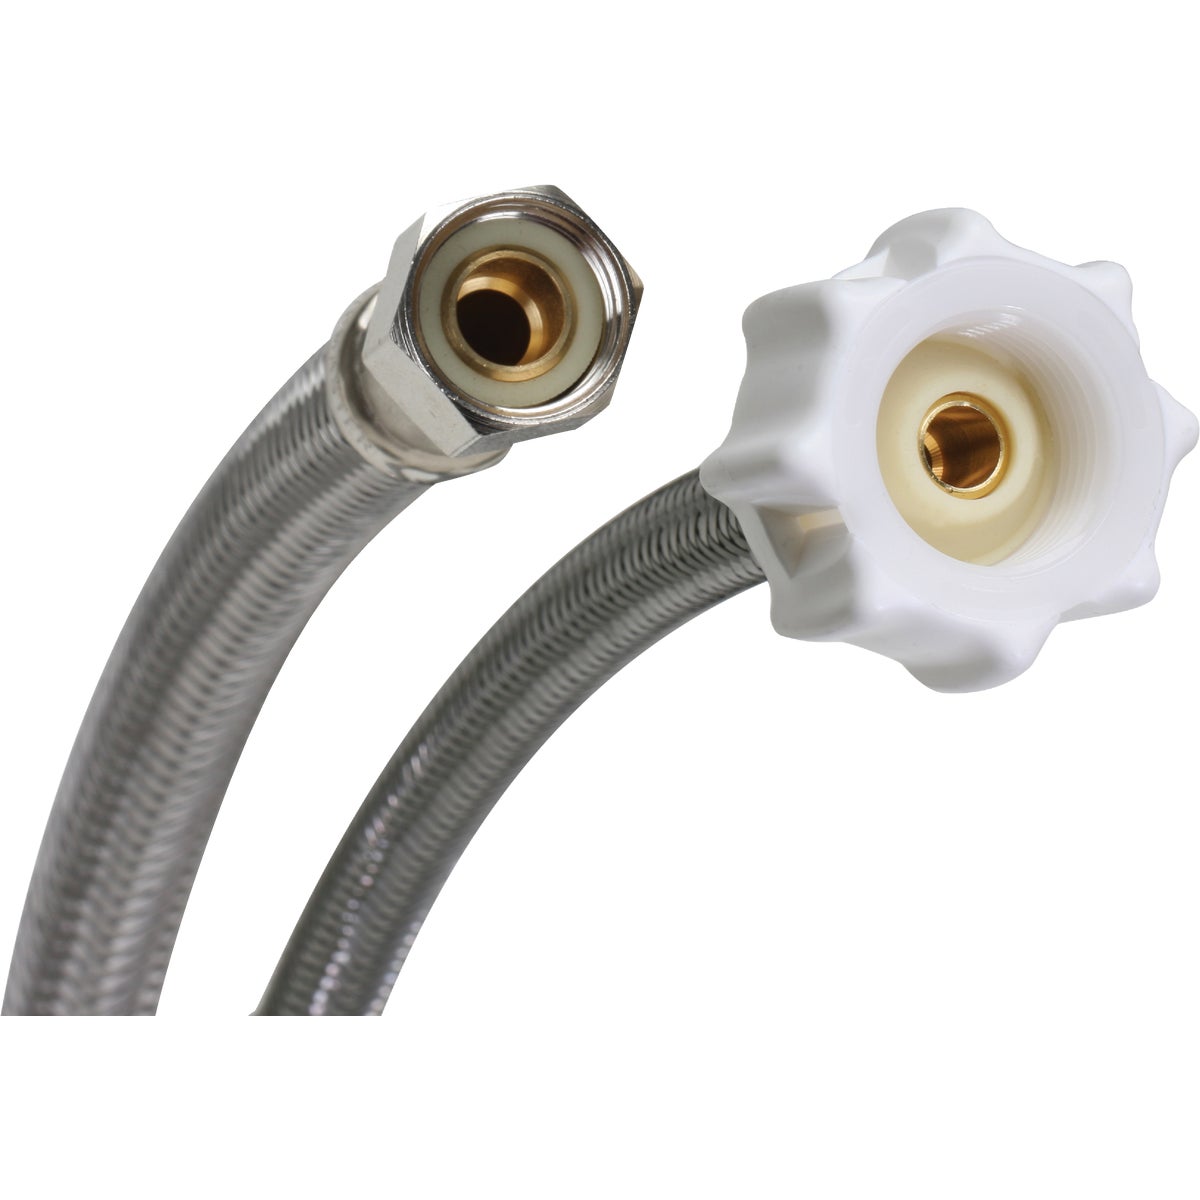 Fluidmaster Click Seal 3/8 In. Comp x 7/8 In. Ballcock x 12 In. L Braided Stainless Steel Toilet Connector